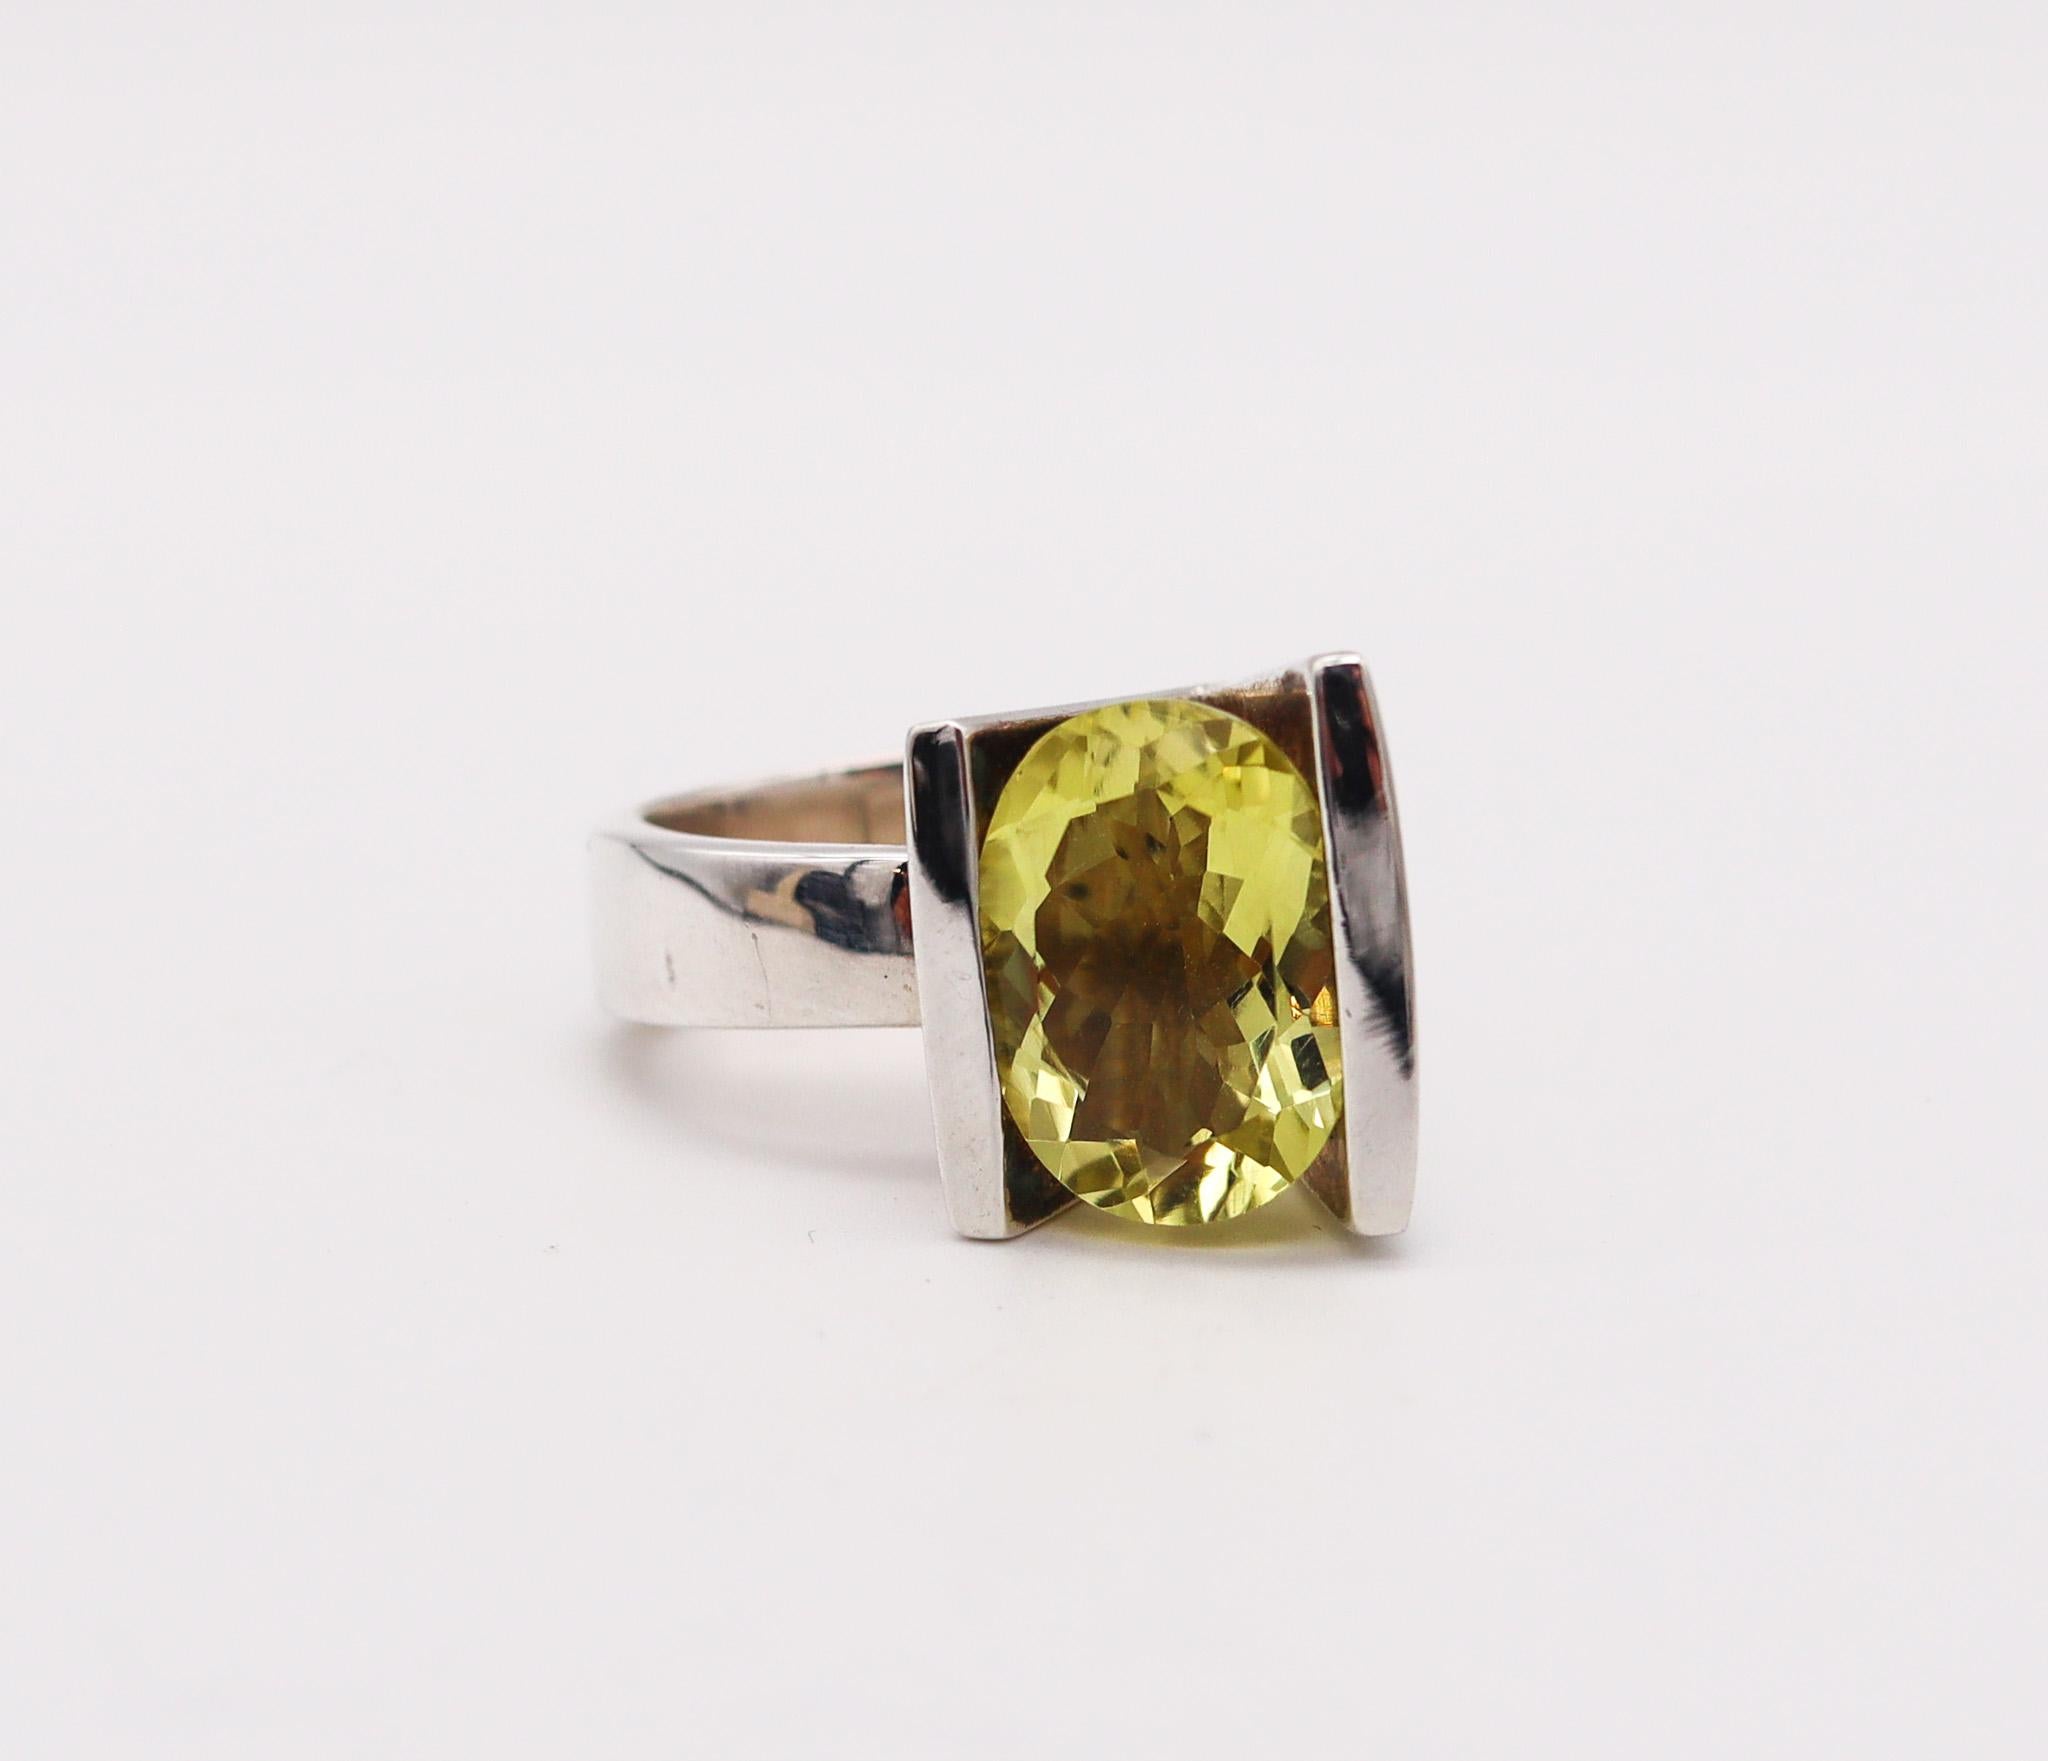 Oval Cut Monica Coscioni Modernist Cocktail Ring In Sterling Silver With 9.78 Ct Heliodor For Sale